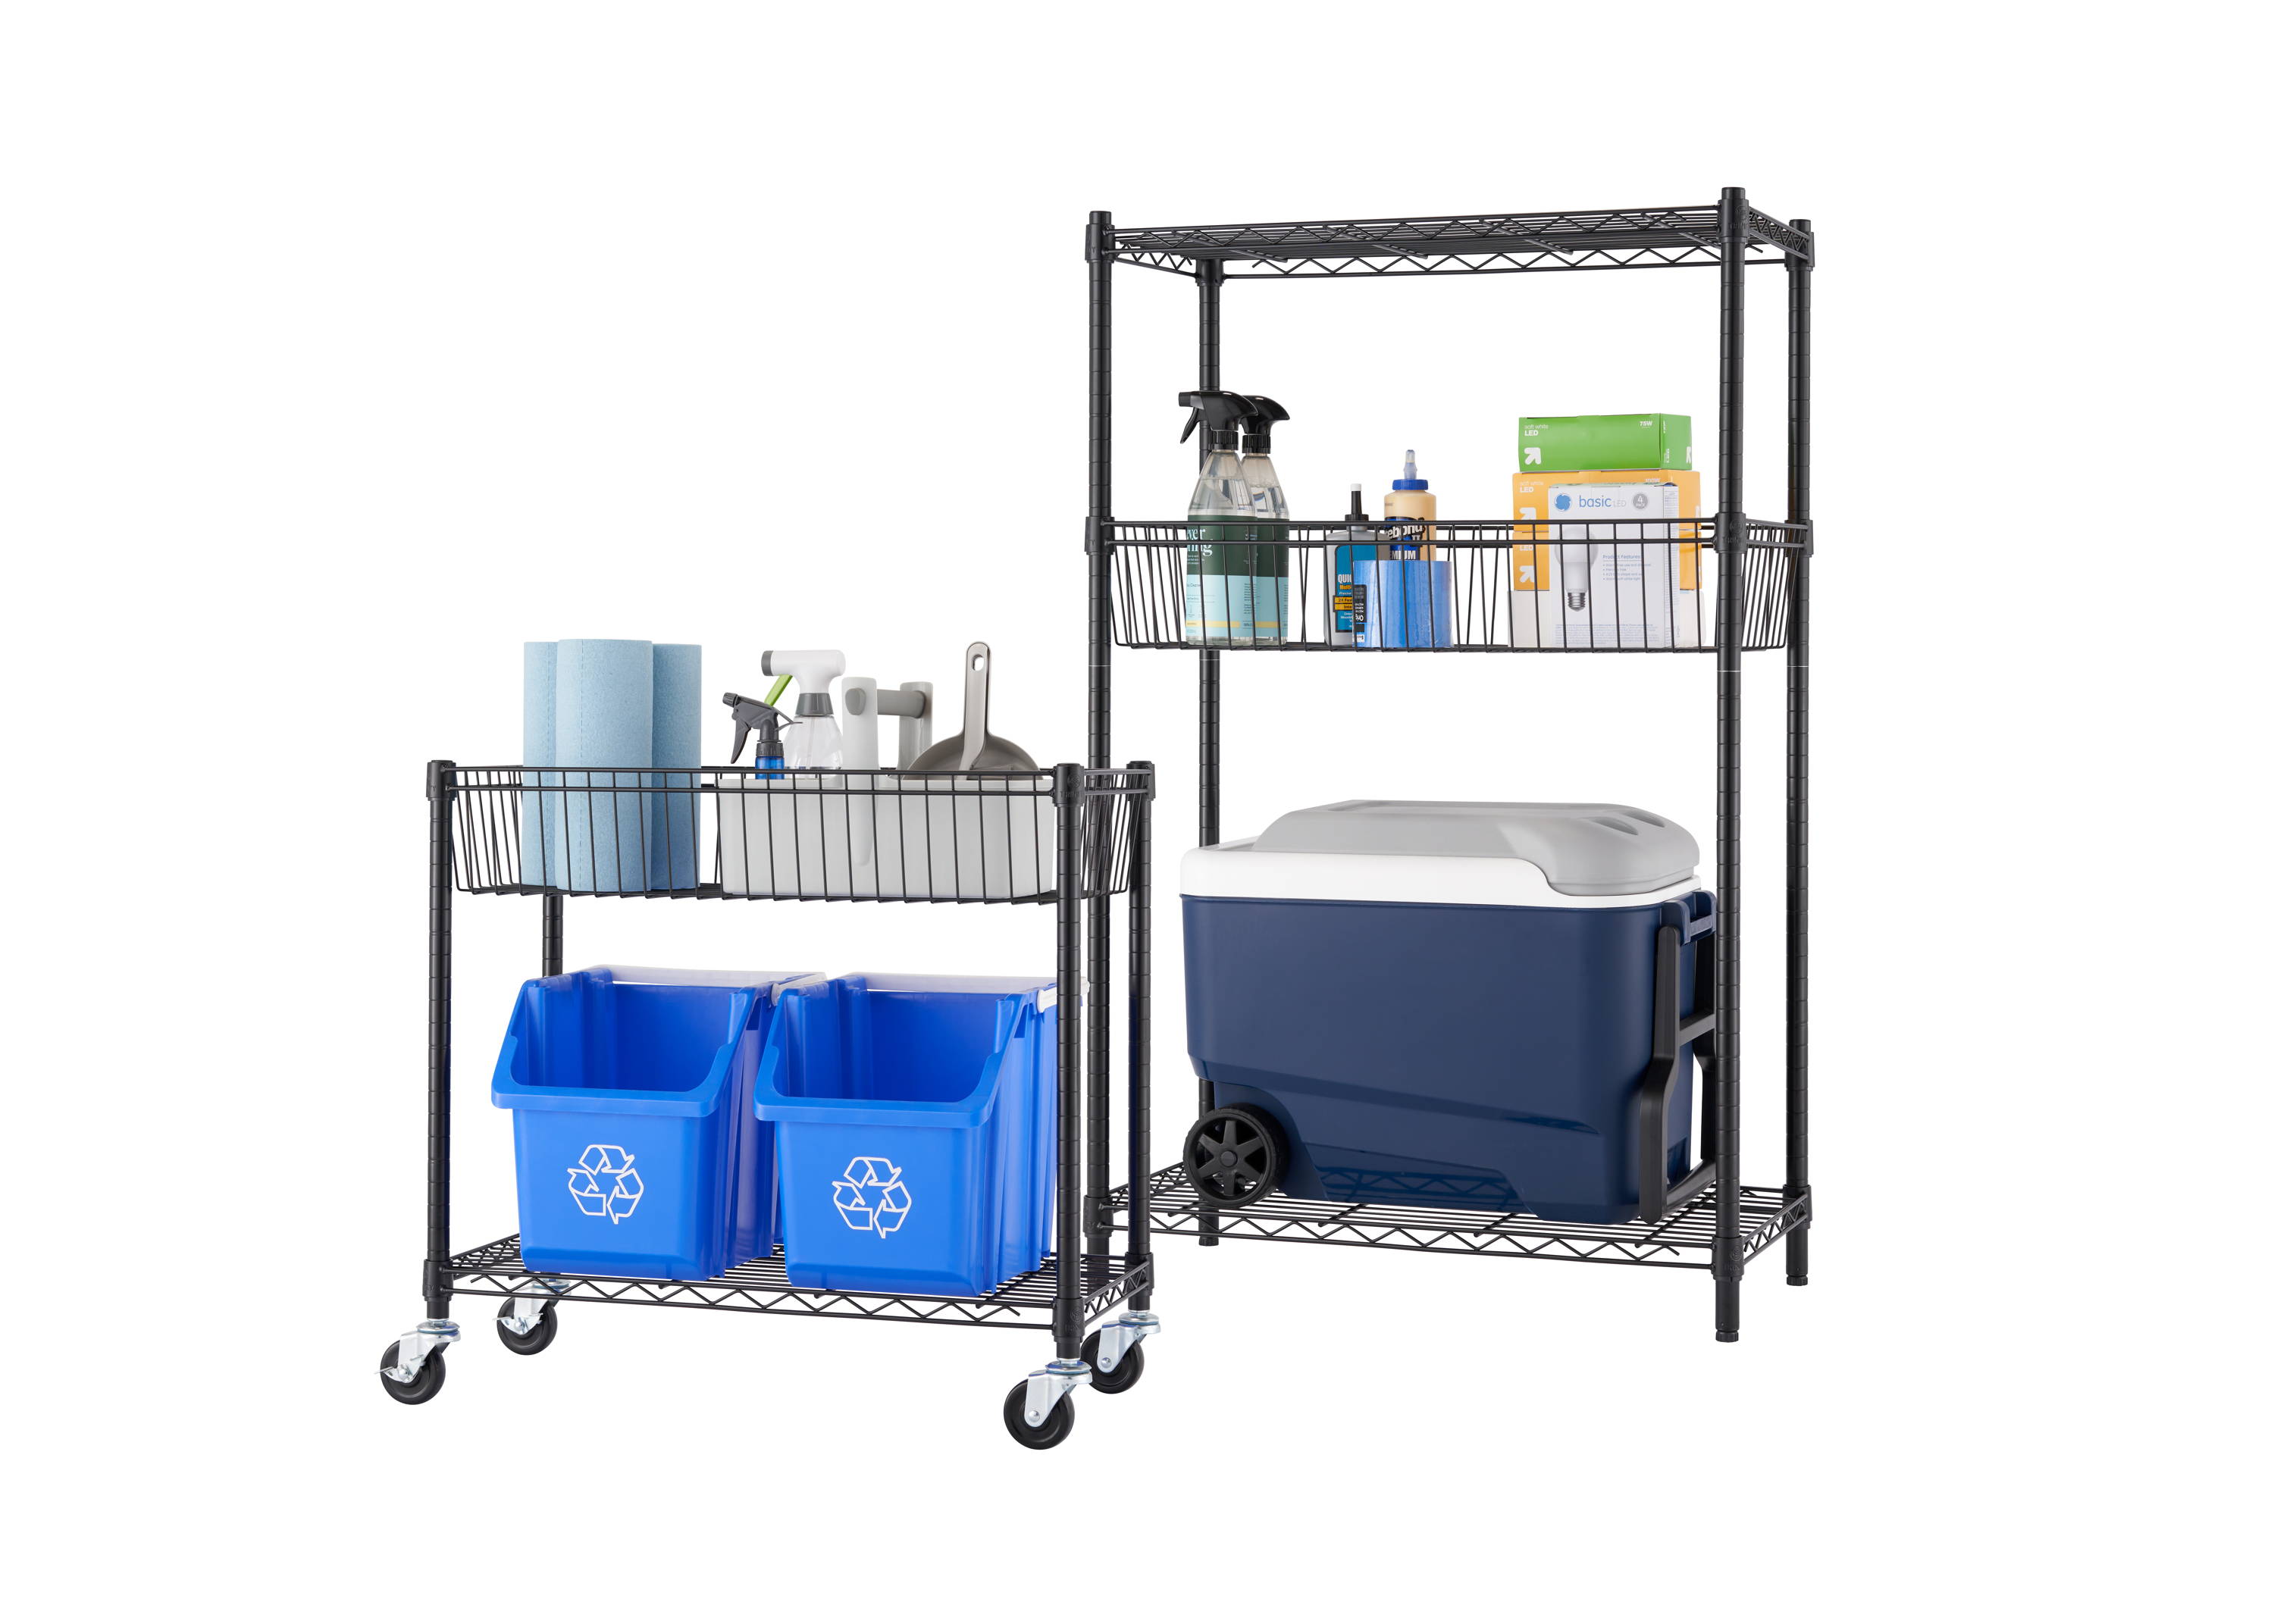 shelving racks with products on them